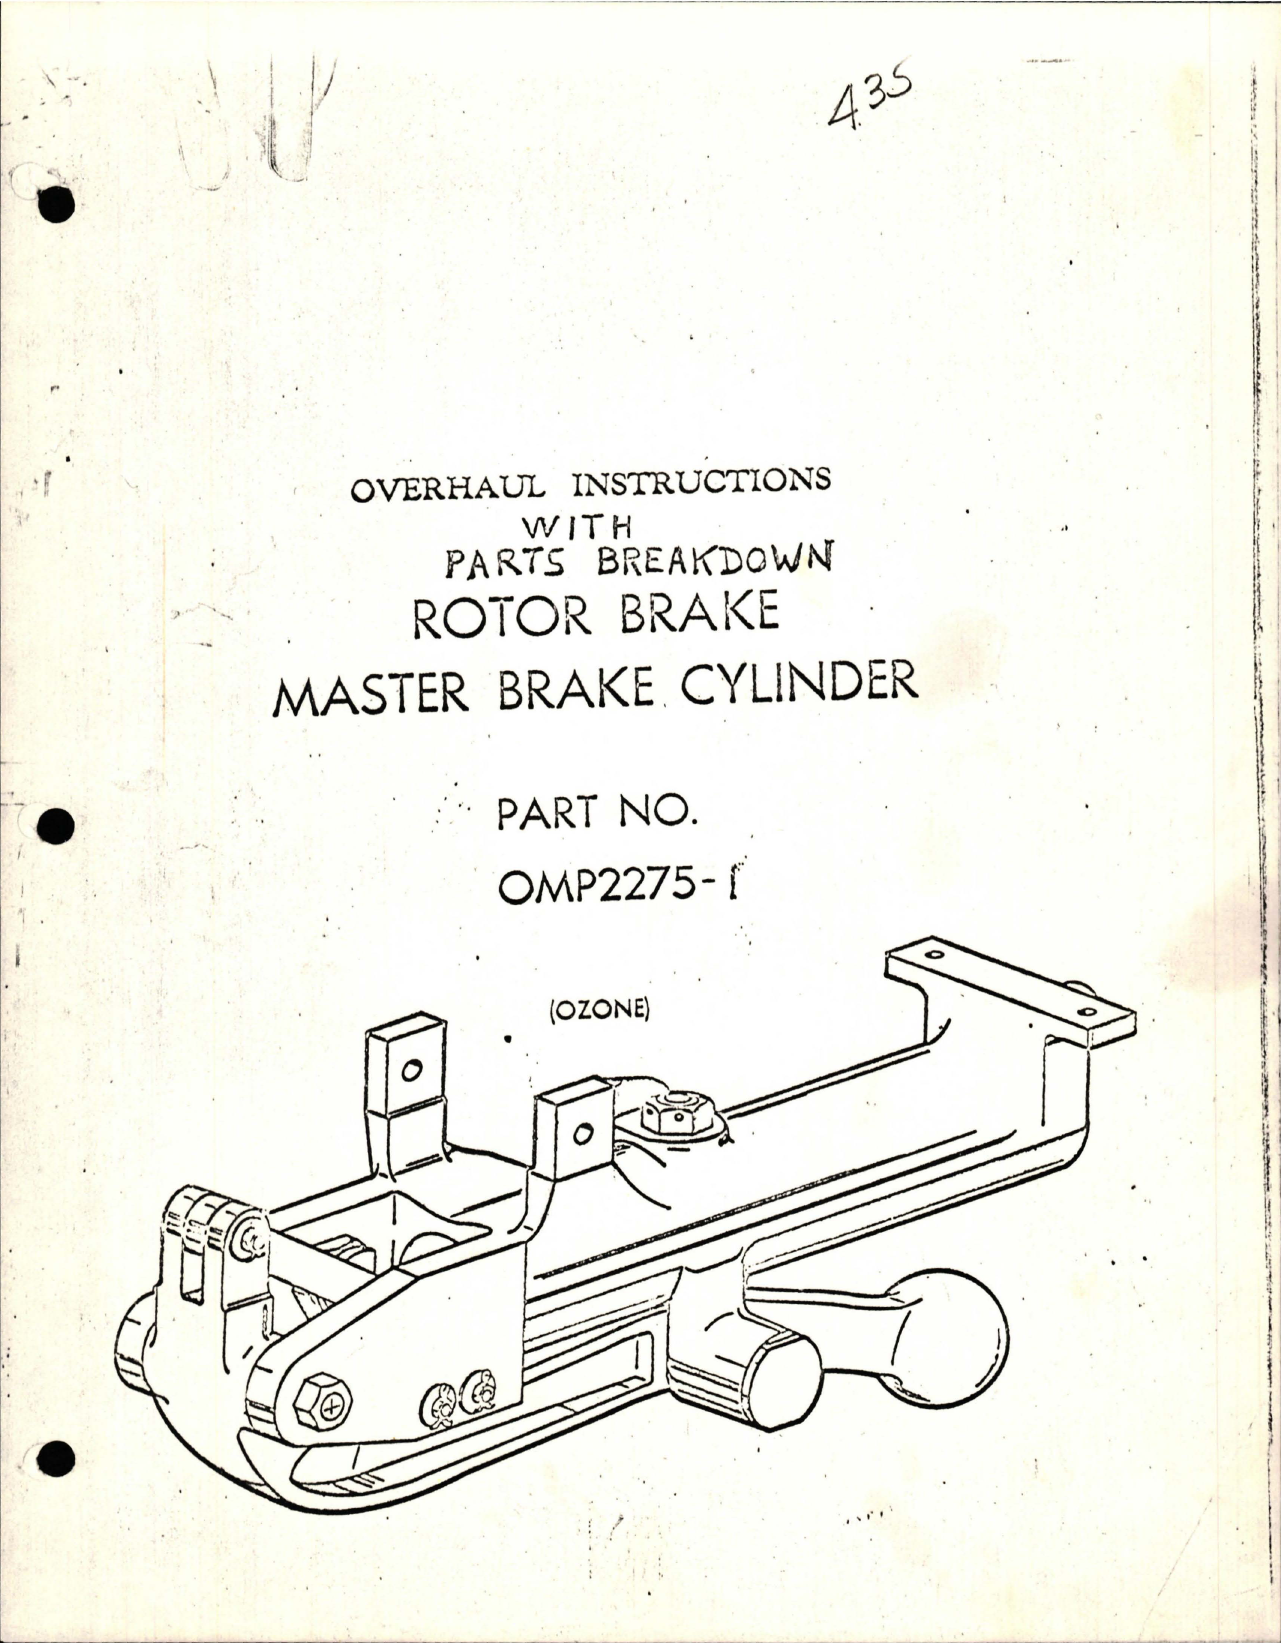 Sample page 1 from AirCorps Library document: Overhaul Instructions with Parts Breakdown for Rotor Brake Master Brake Cylinder - Part OMP2275-1